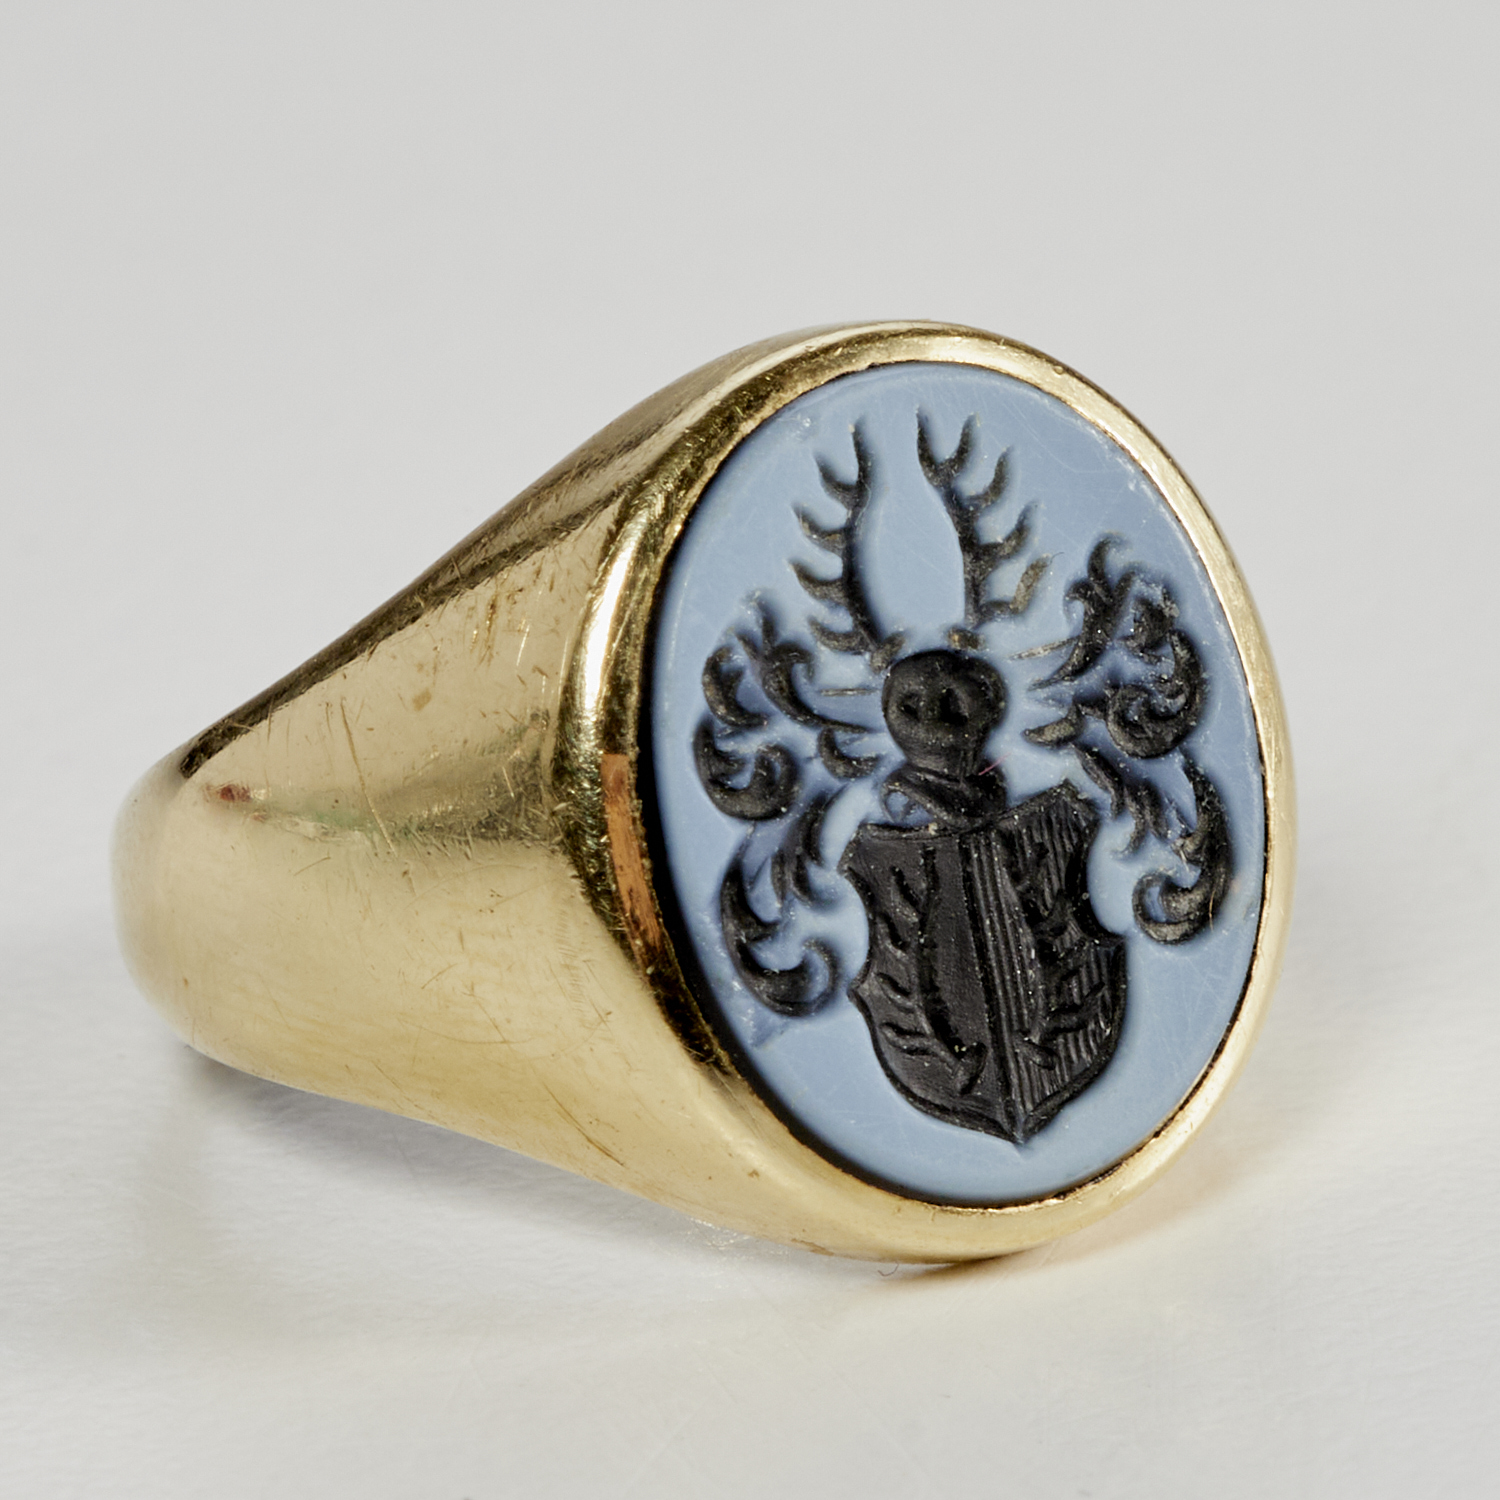 14K GOLD SIGNET RING WITH CREST